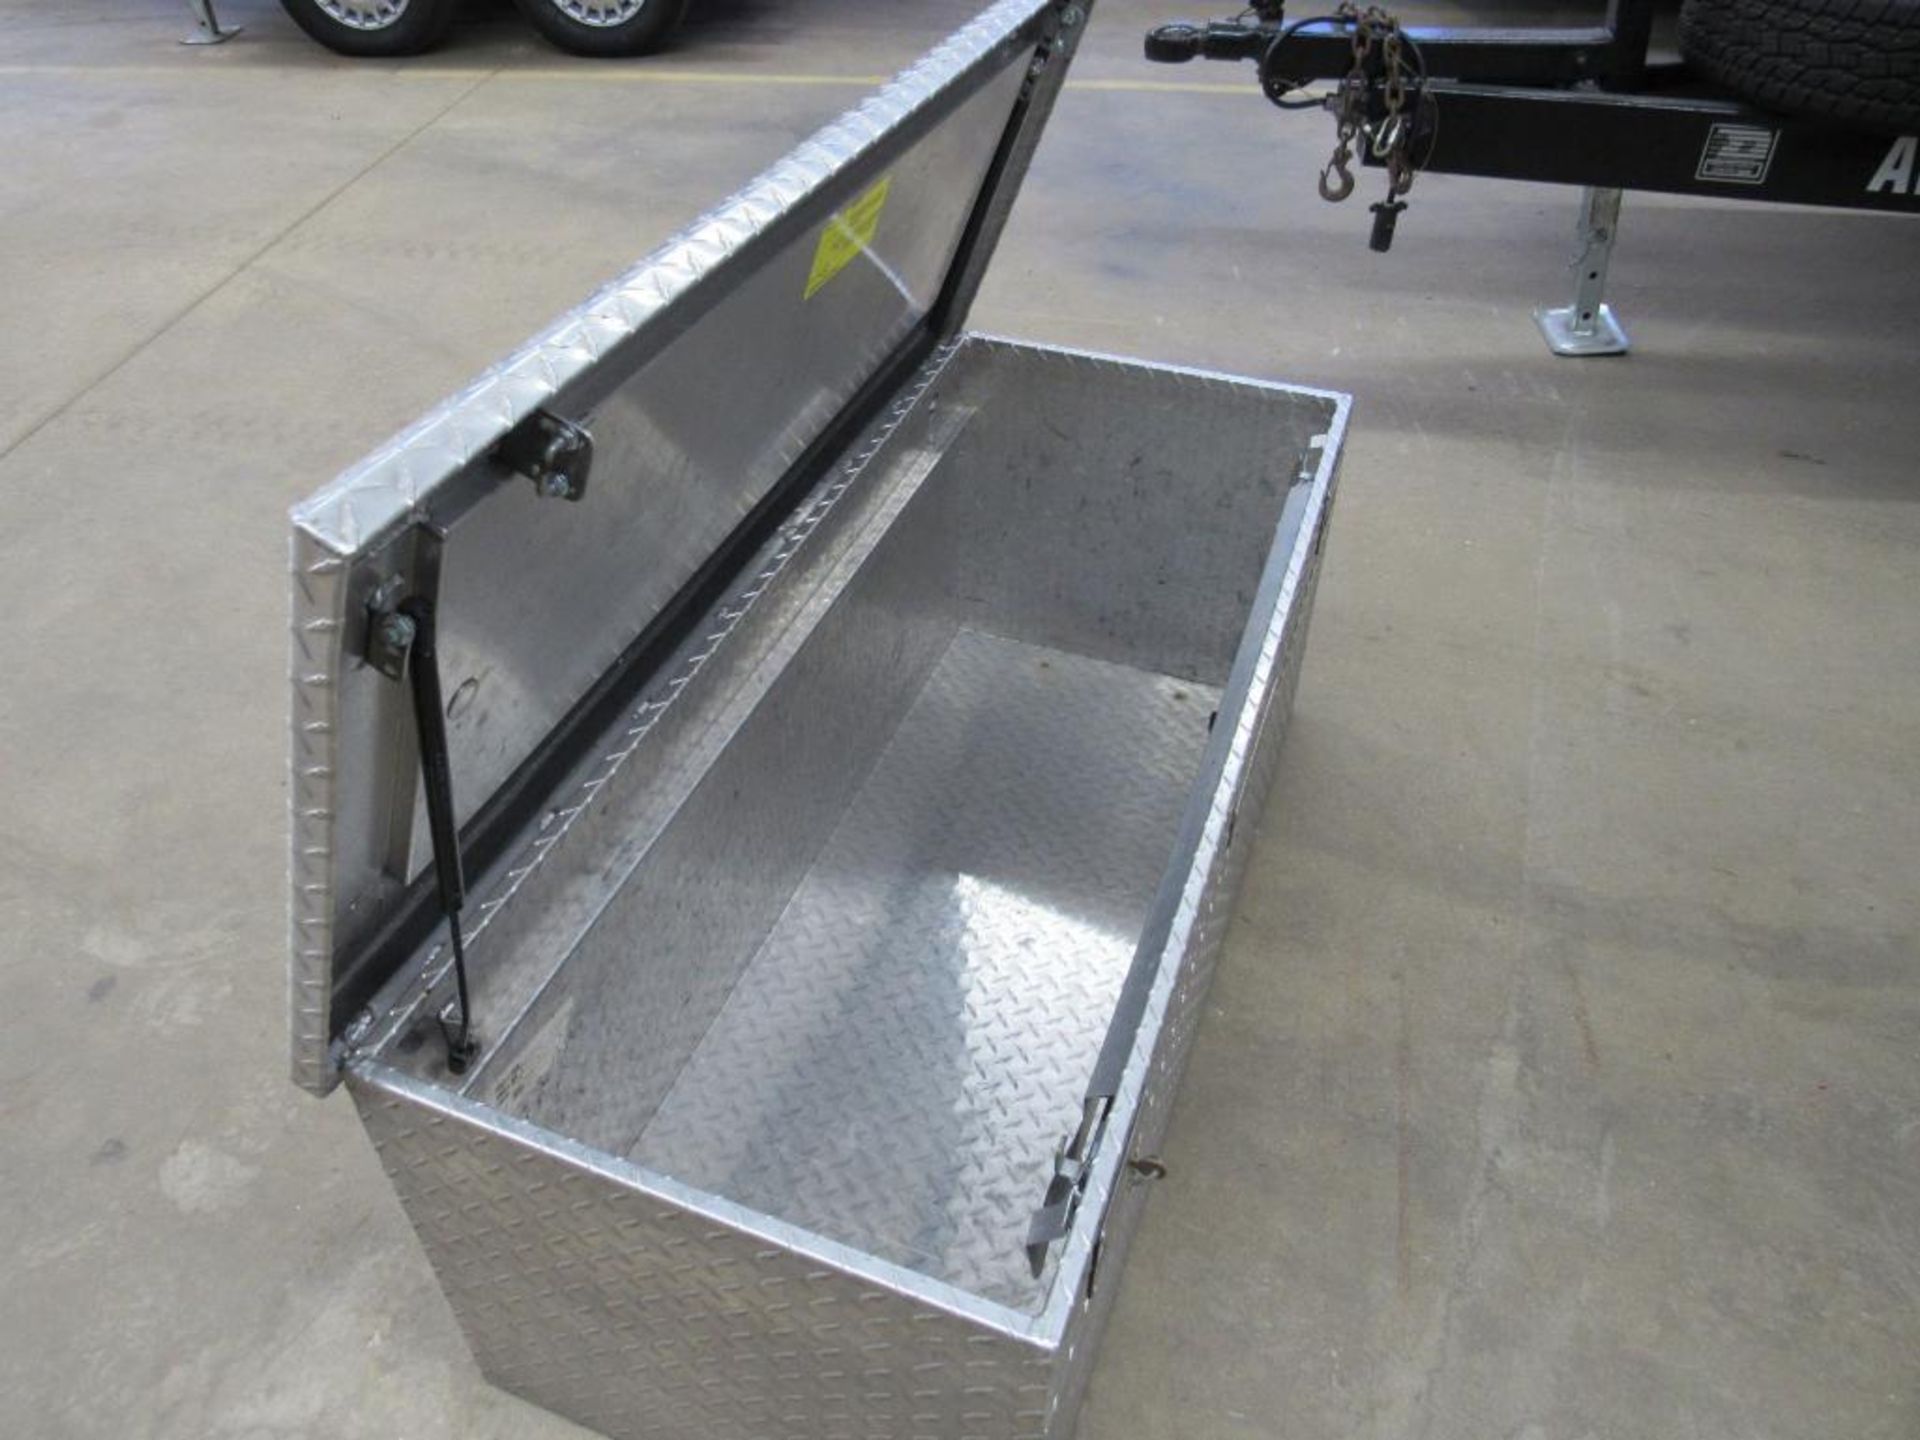 CHALLENGE Aluminum Truck Bed Tool Box 4 ft. x 20 in. x 20 in. - Image 2 of 4